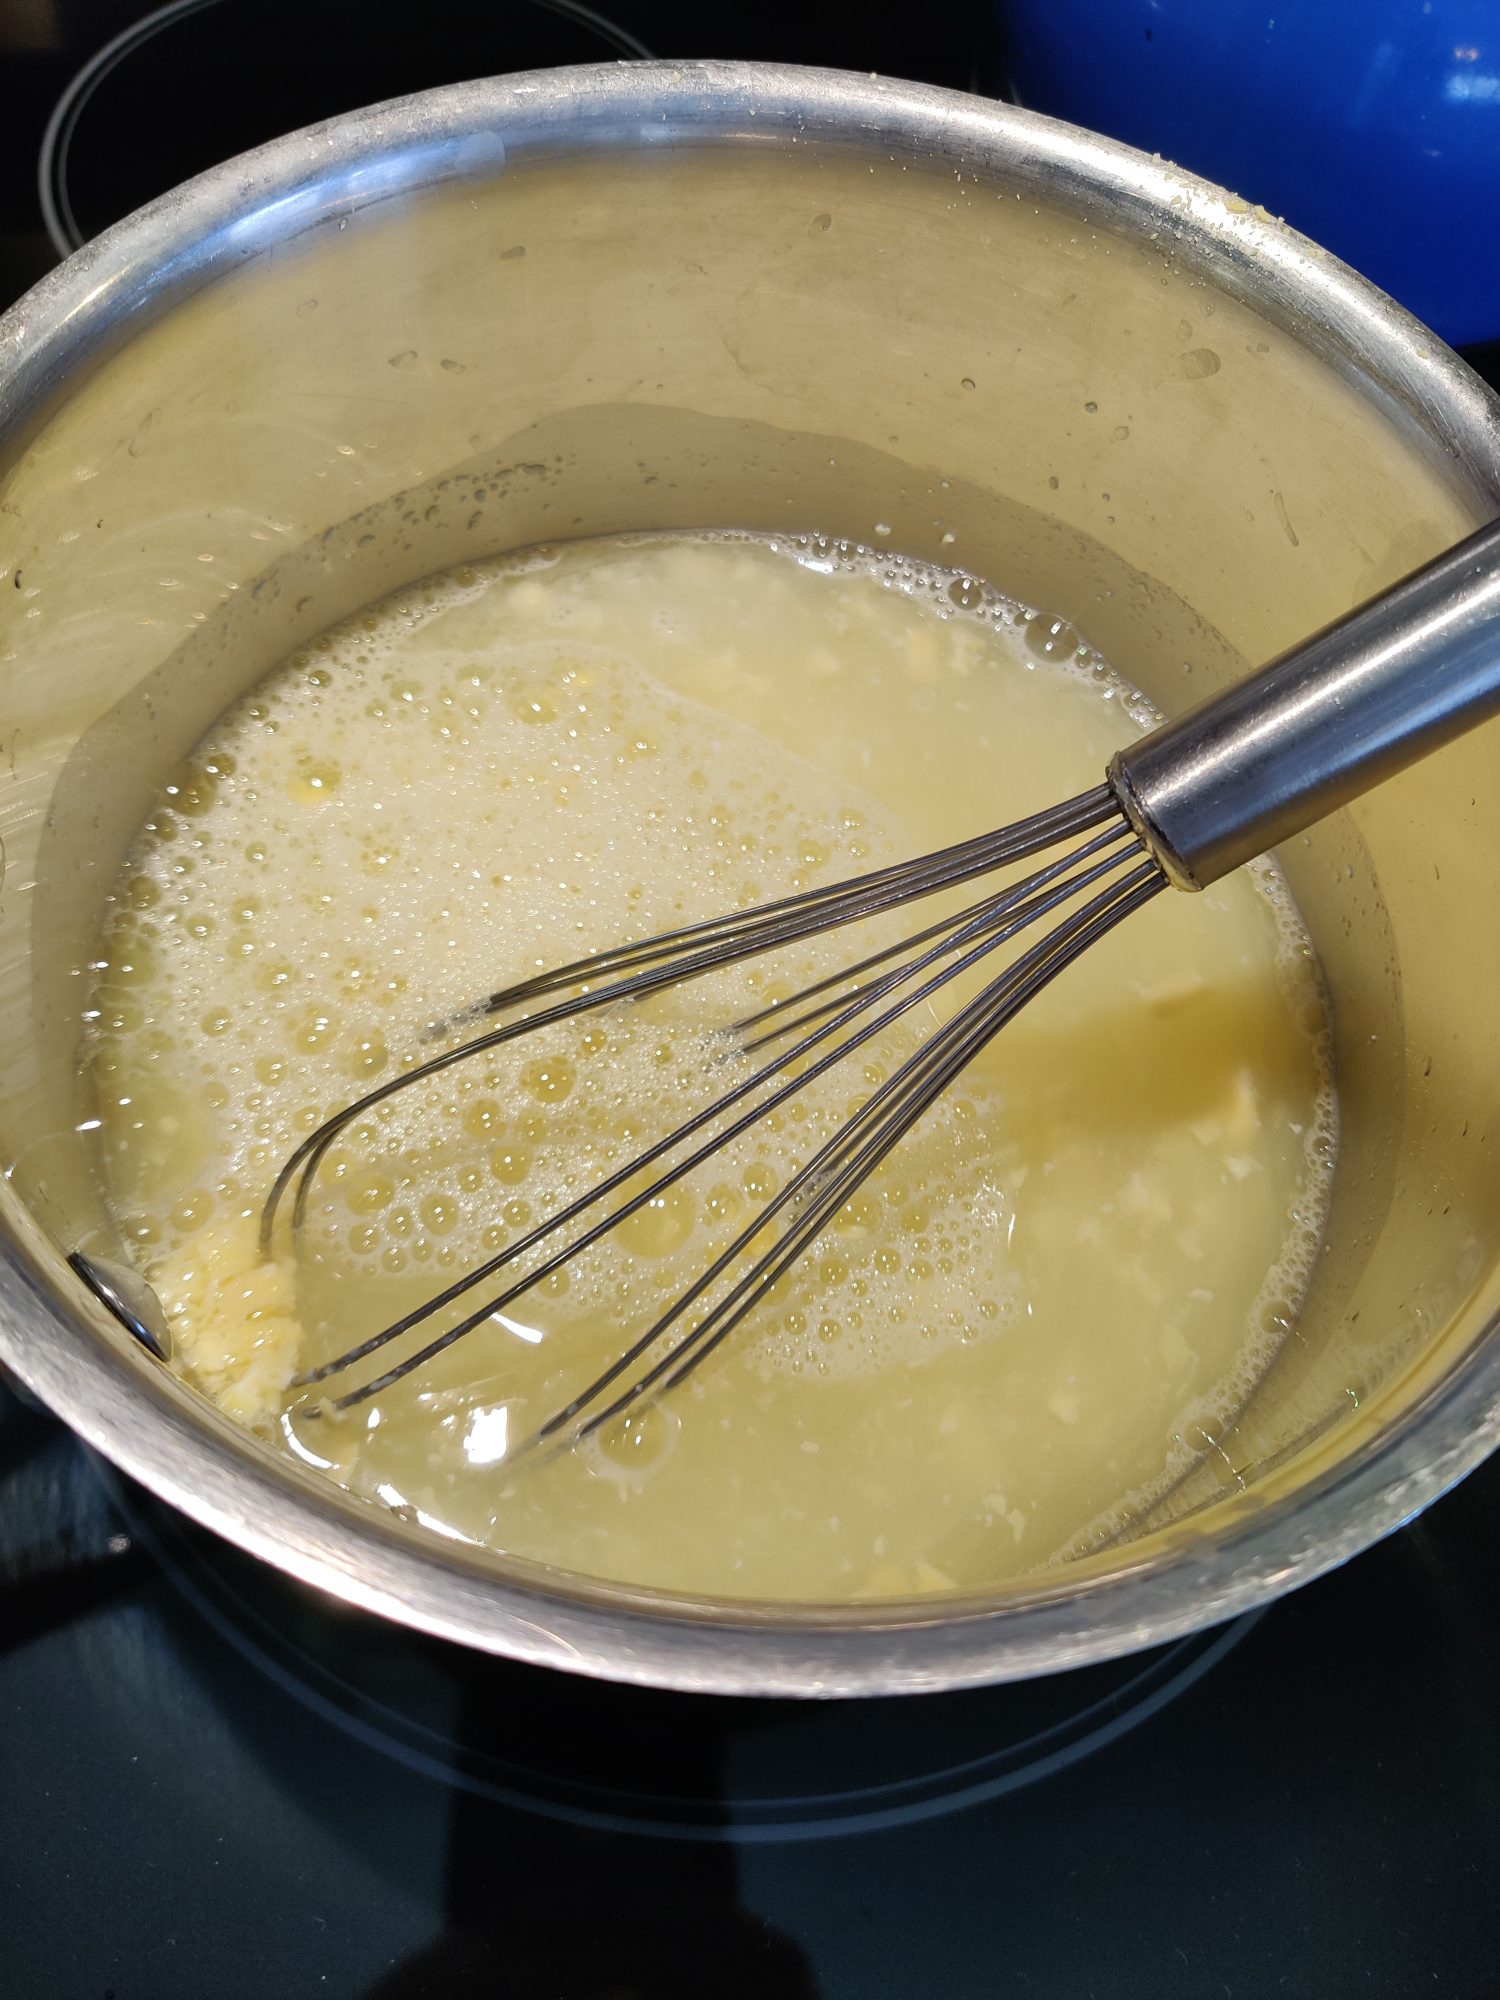 melting fels naptha into water for homemade liquid laundry detergent